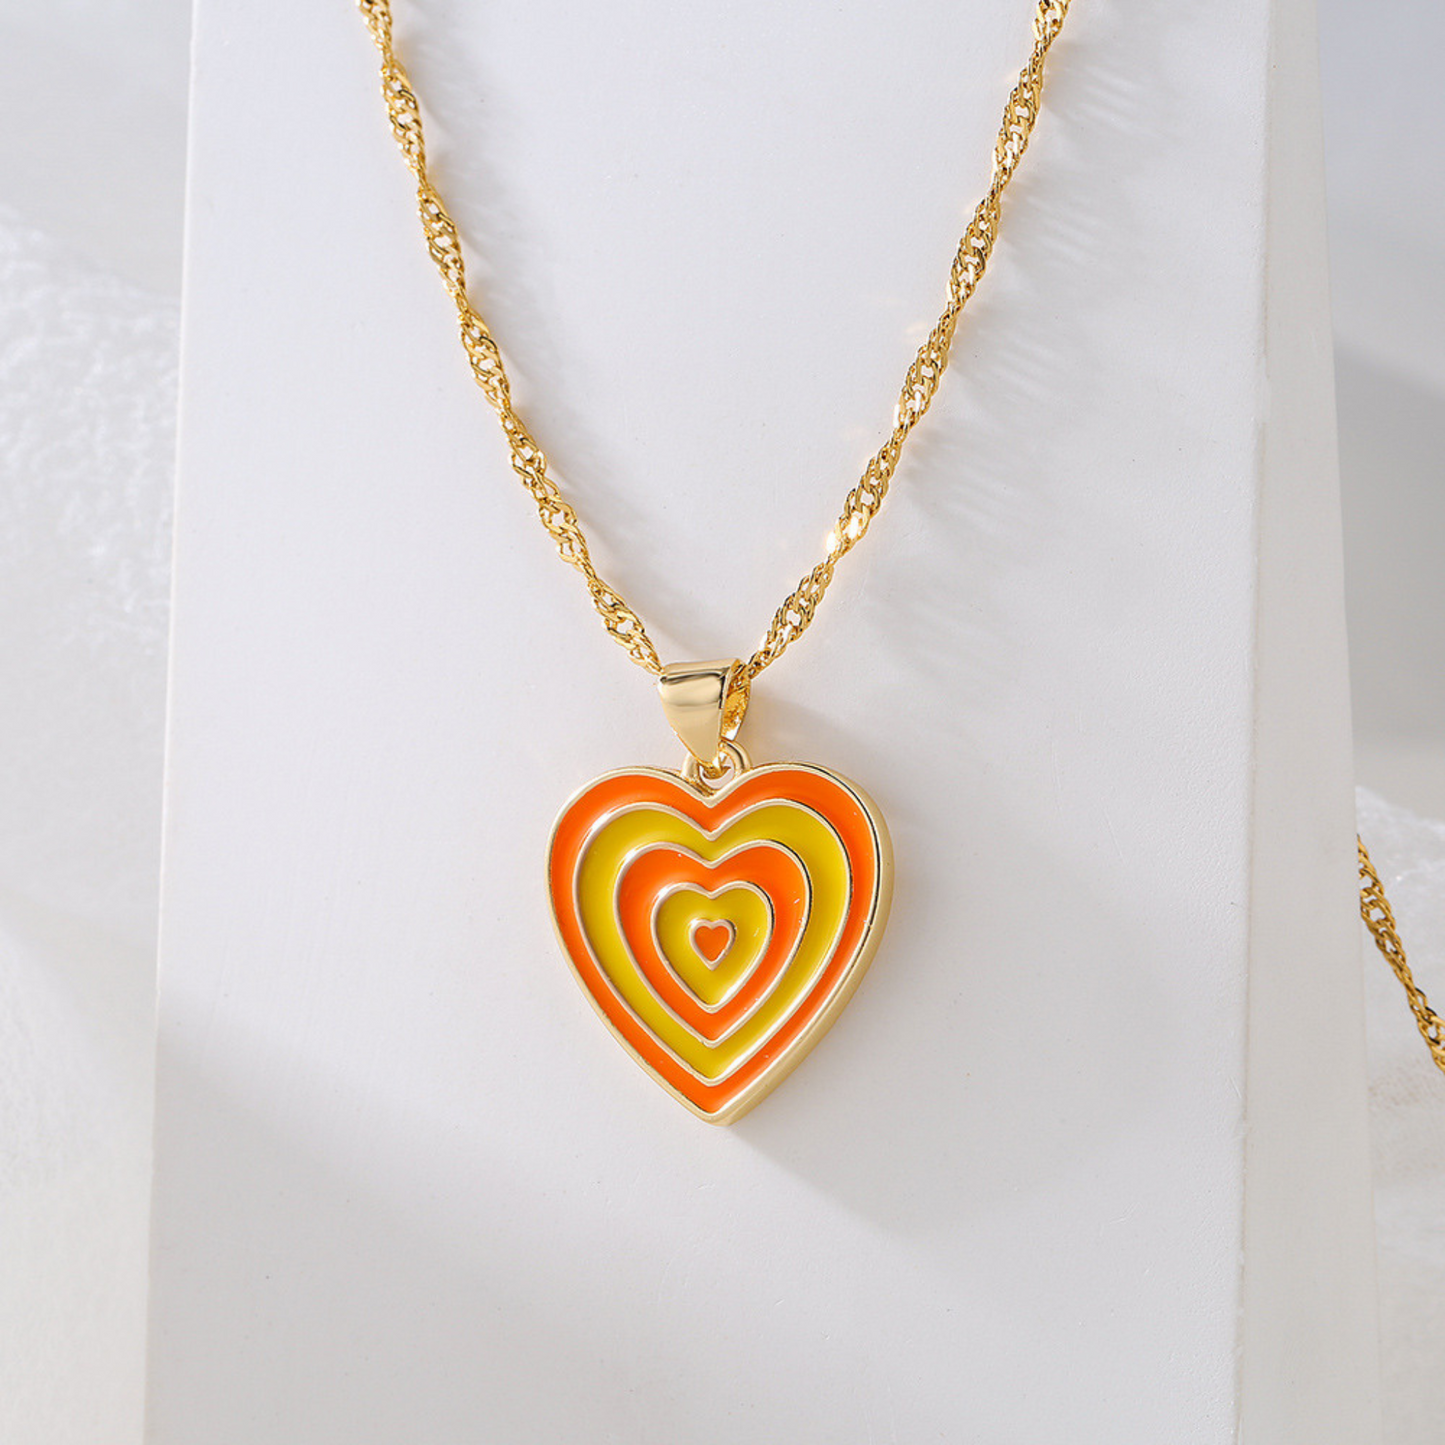 Colorful Heart Pendant Necklace for Women